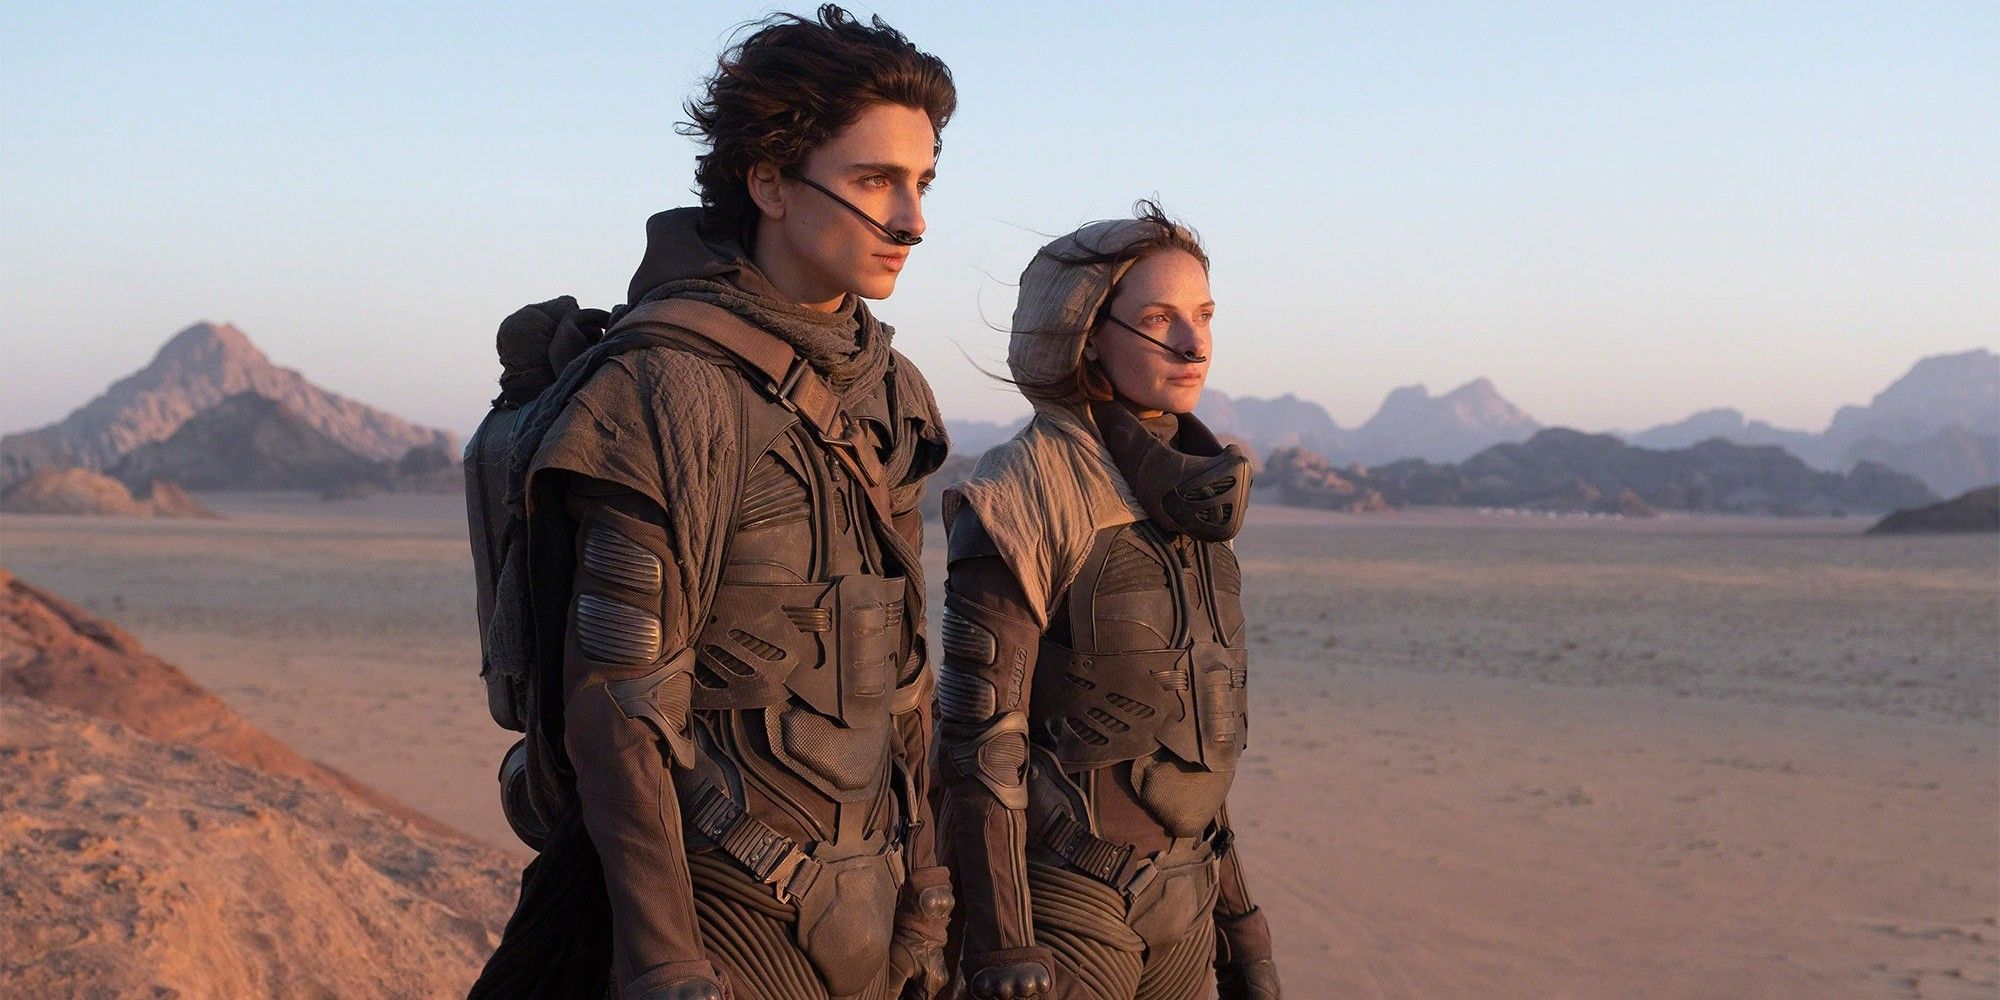 Dune 10 Things You Should Know Before Seeing The Film